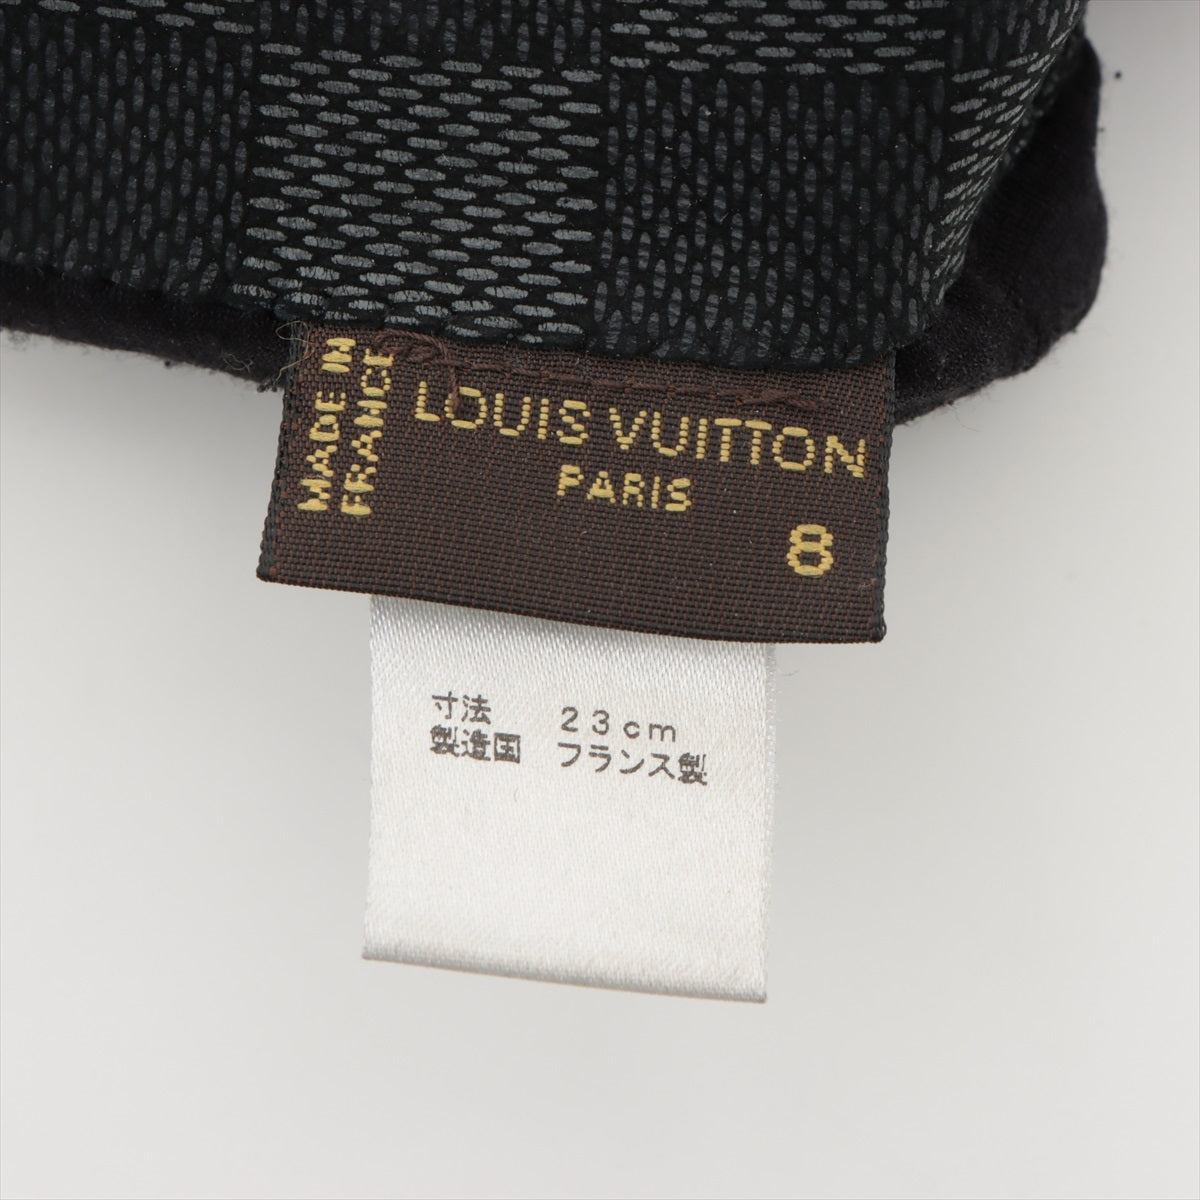 Louis Vuitton M58327 Gon Damier Grove Sheep leather x silk Black Wears Wrinkled Creases